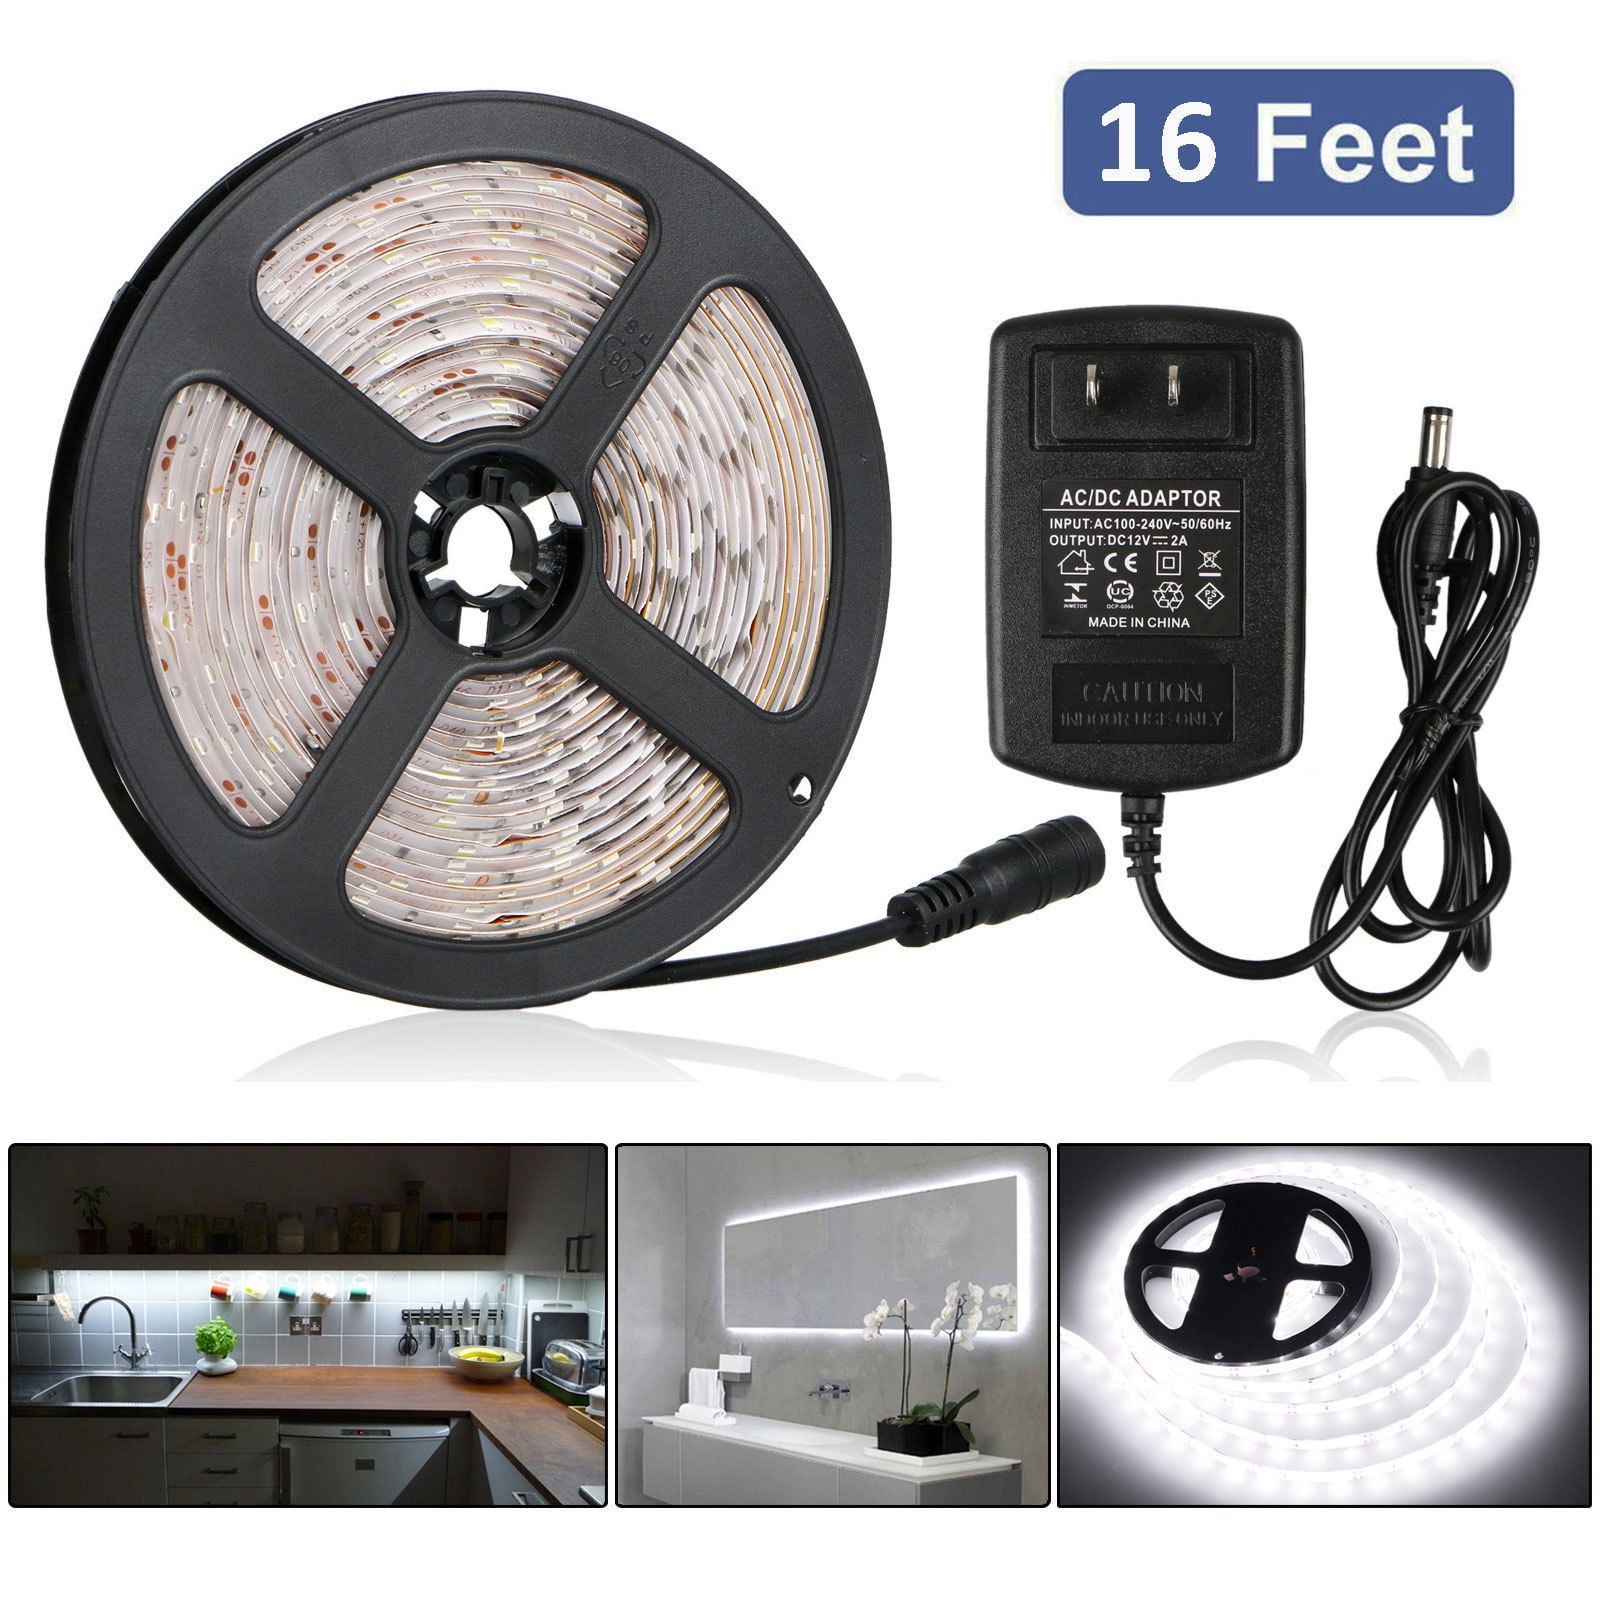 Details about   16.4FT 5M  300 LED Light Strips Flexible Cool White 2835 SMD Lamp DC12V US Stock 